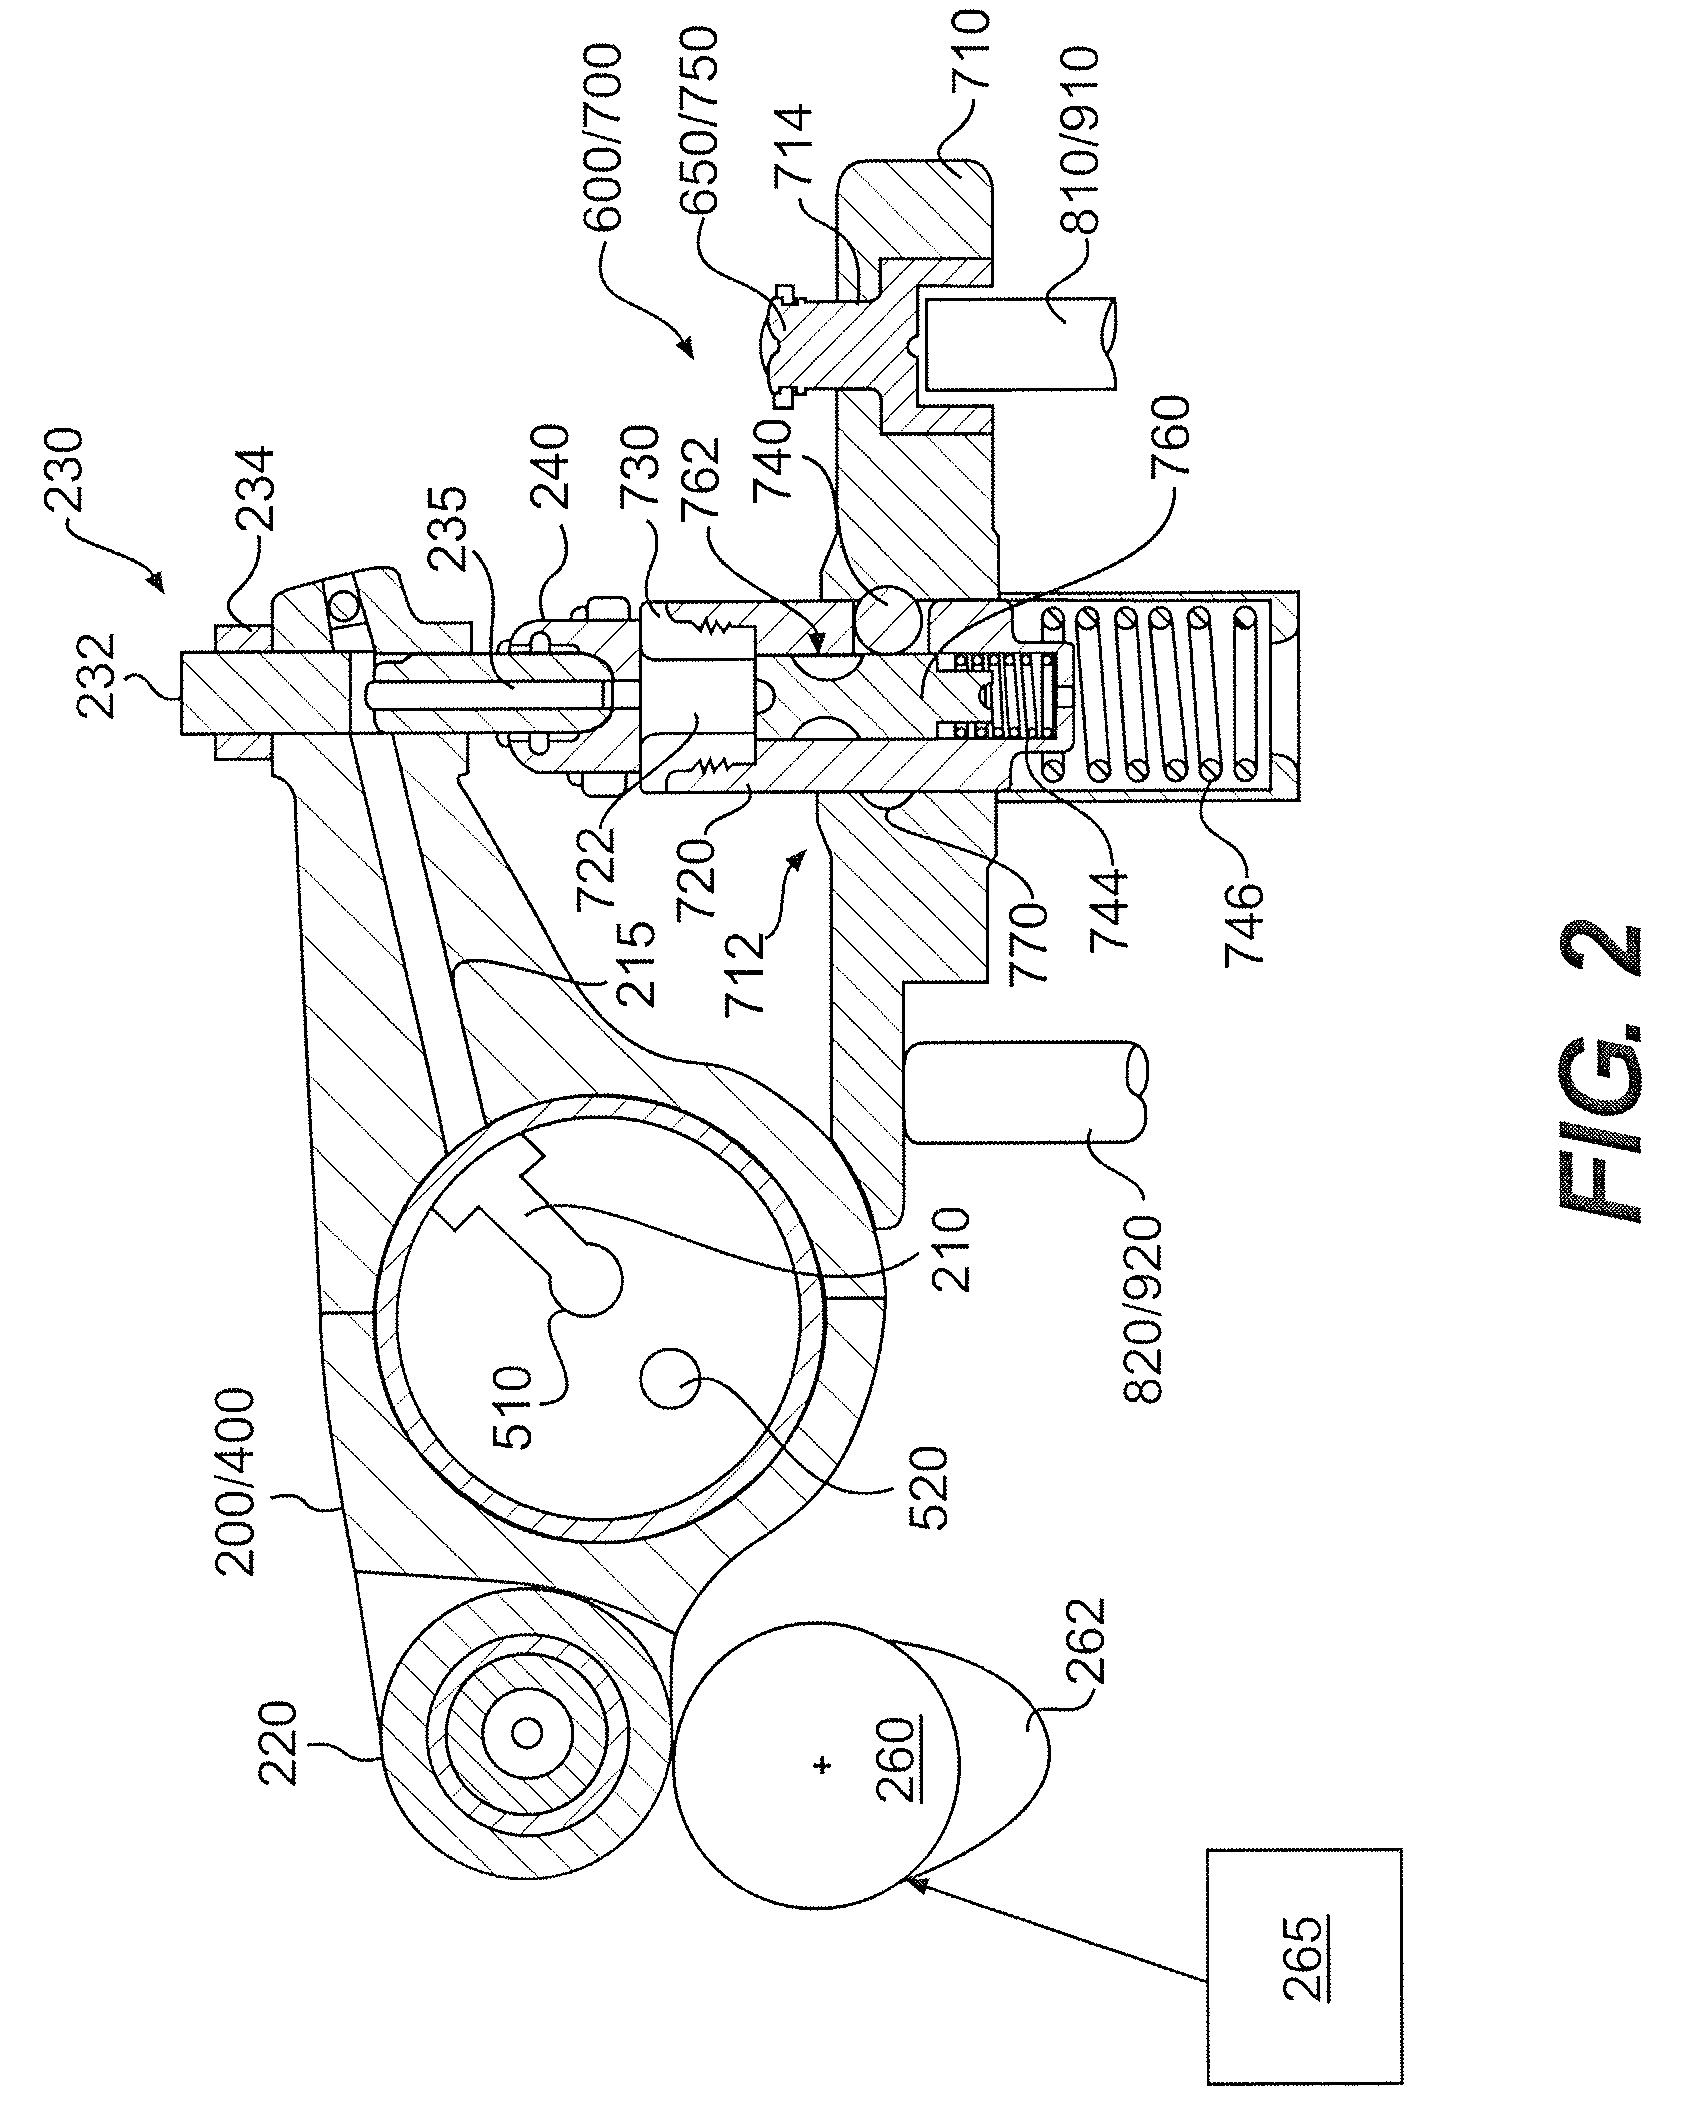 Combined engine braking and positive power engine lost motion valve actuation system